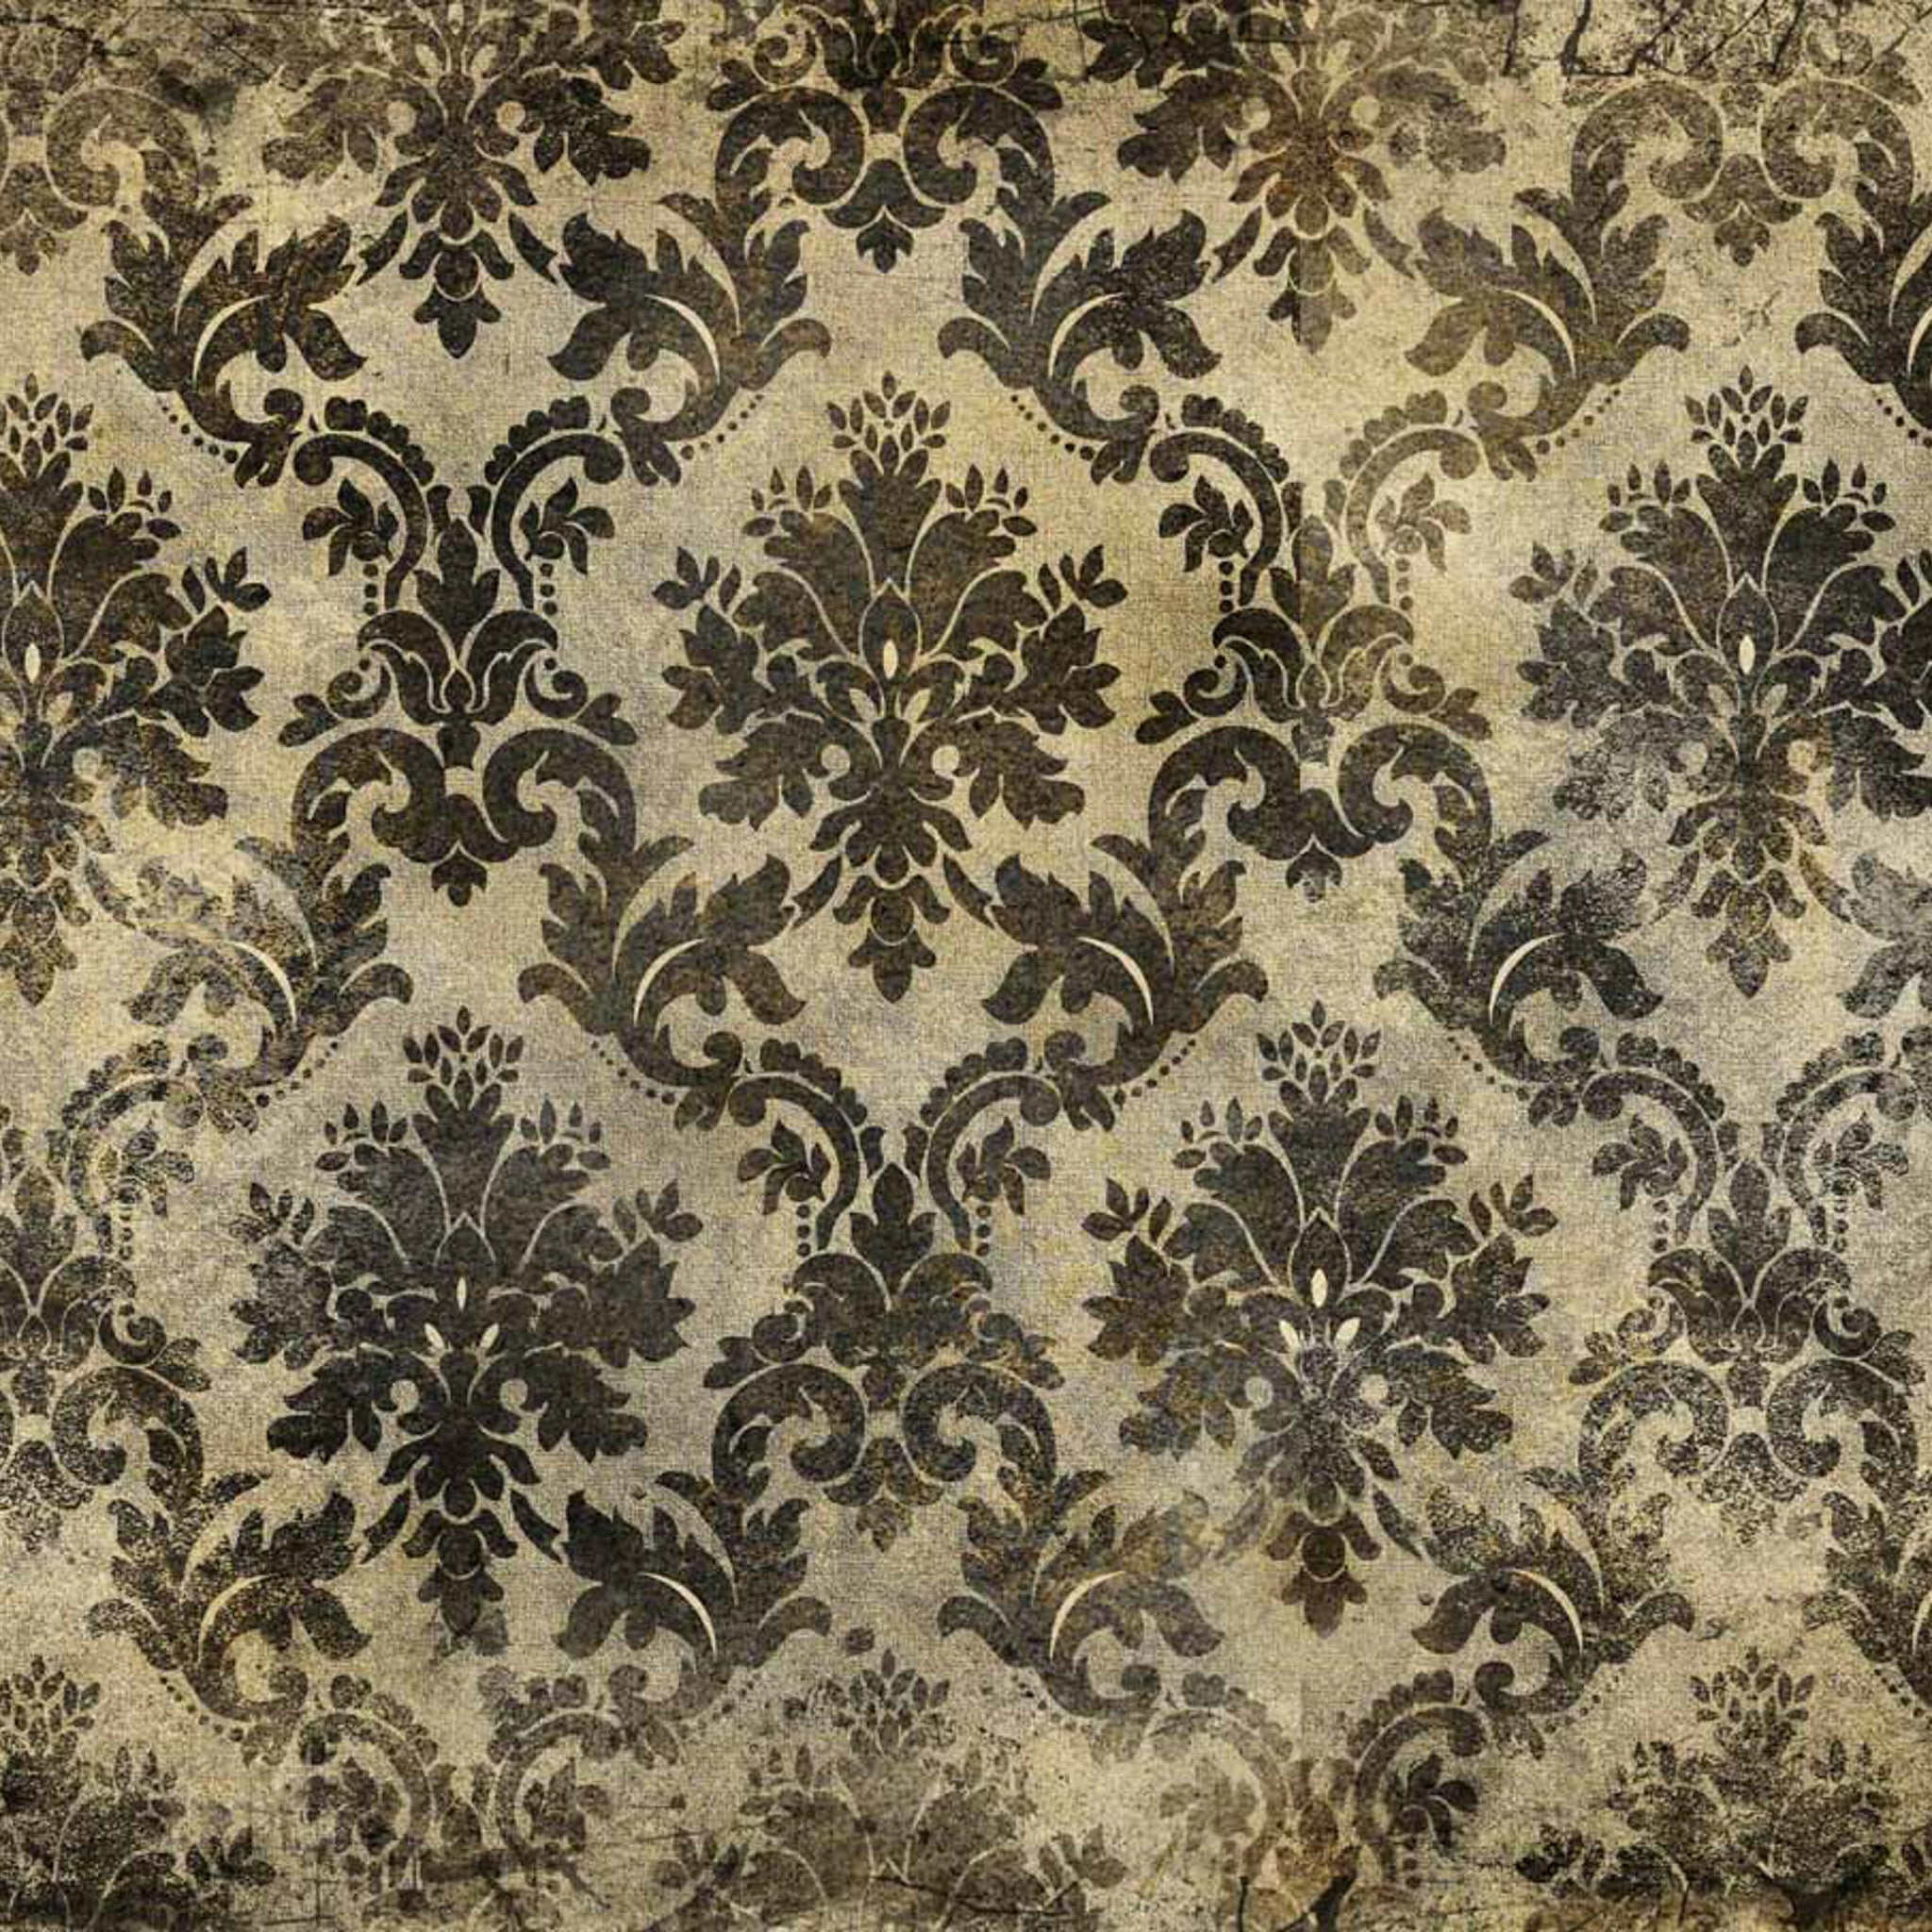 Vintage style Weathered Damask A1 Decoupage Rice Paper close up.